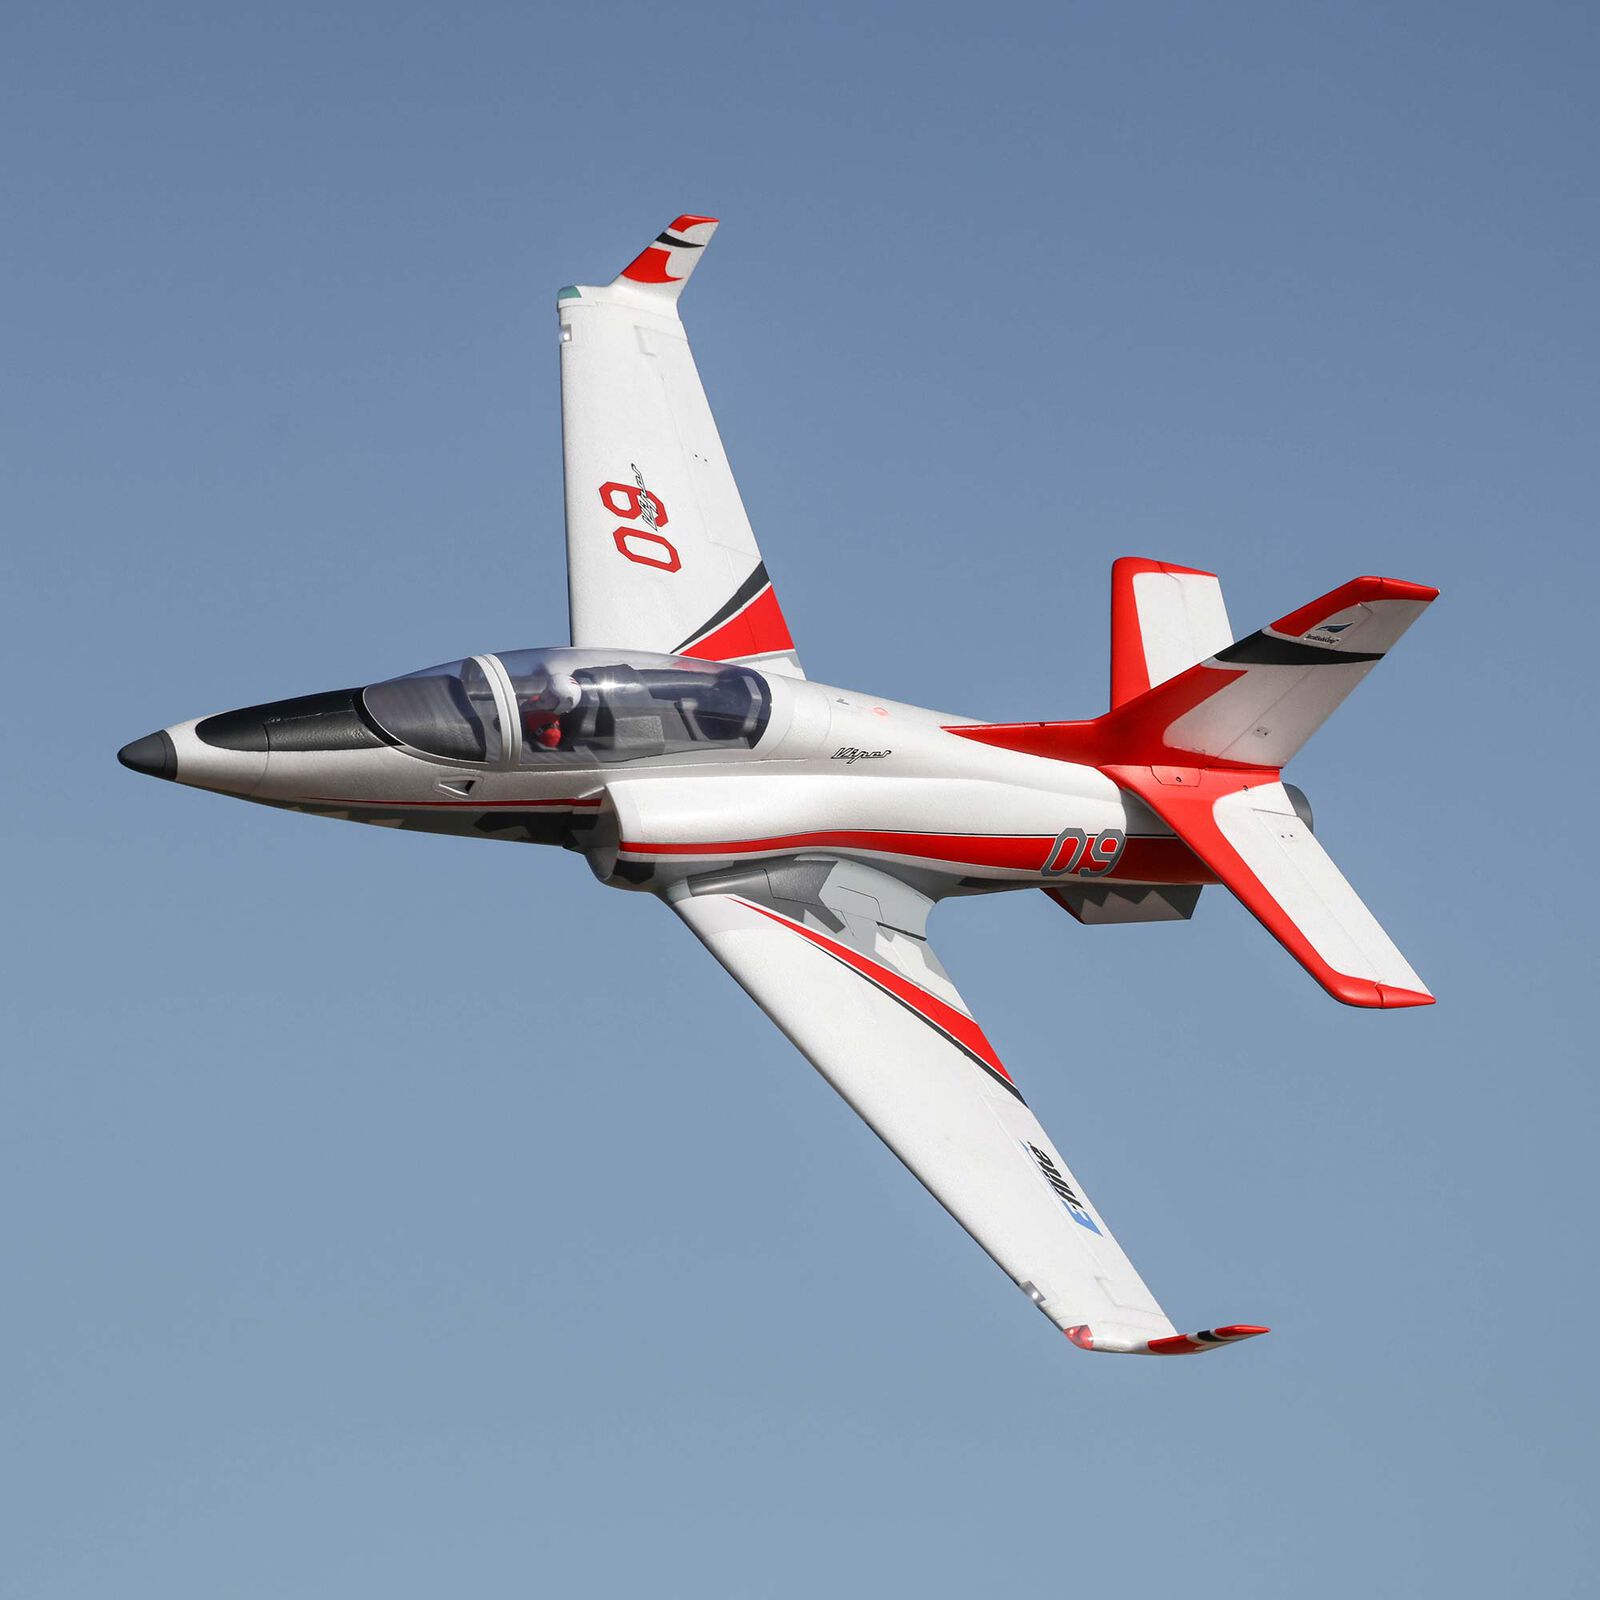 E-Flite Viper 90mm EDF Jet BNF Basic met AS3X & SAFE Select systeem